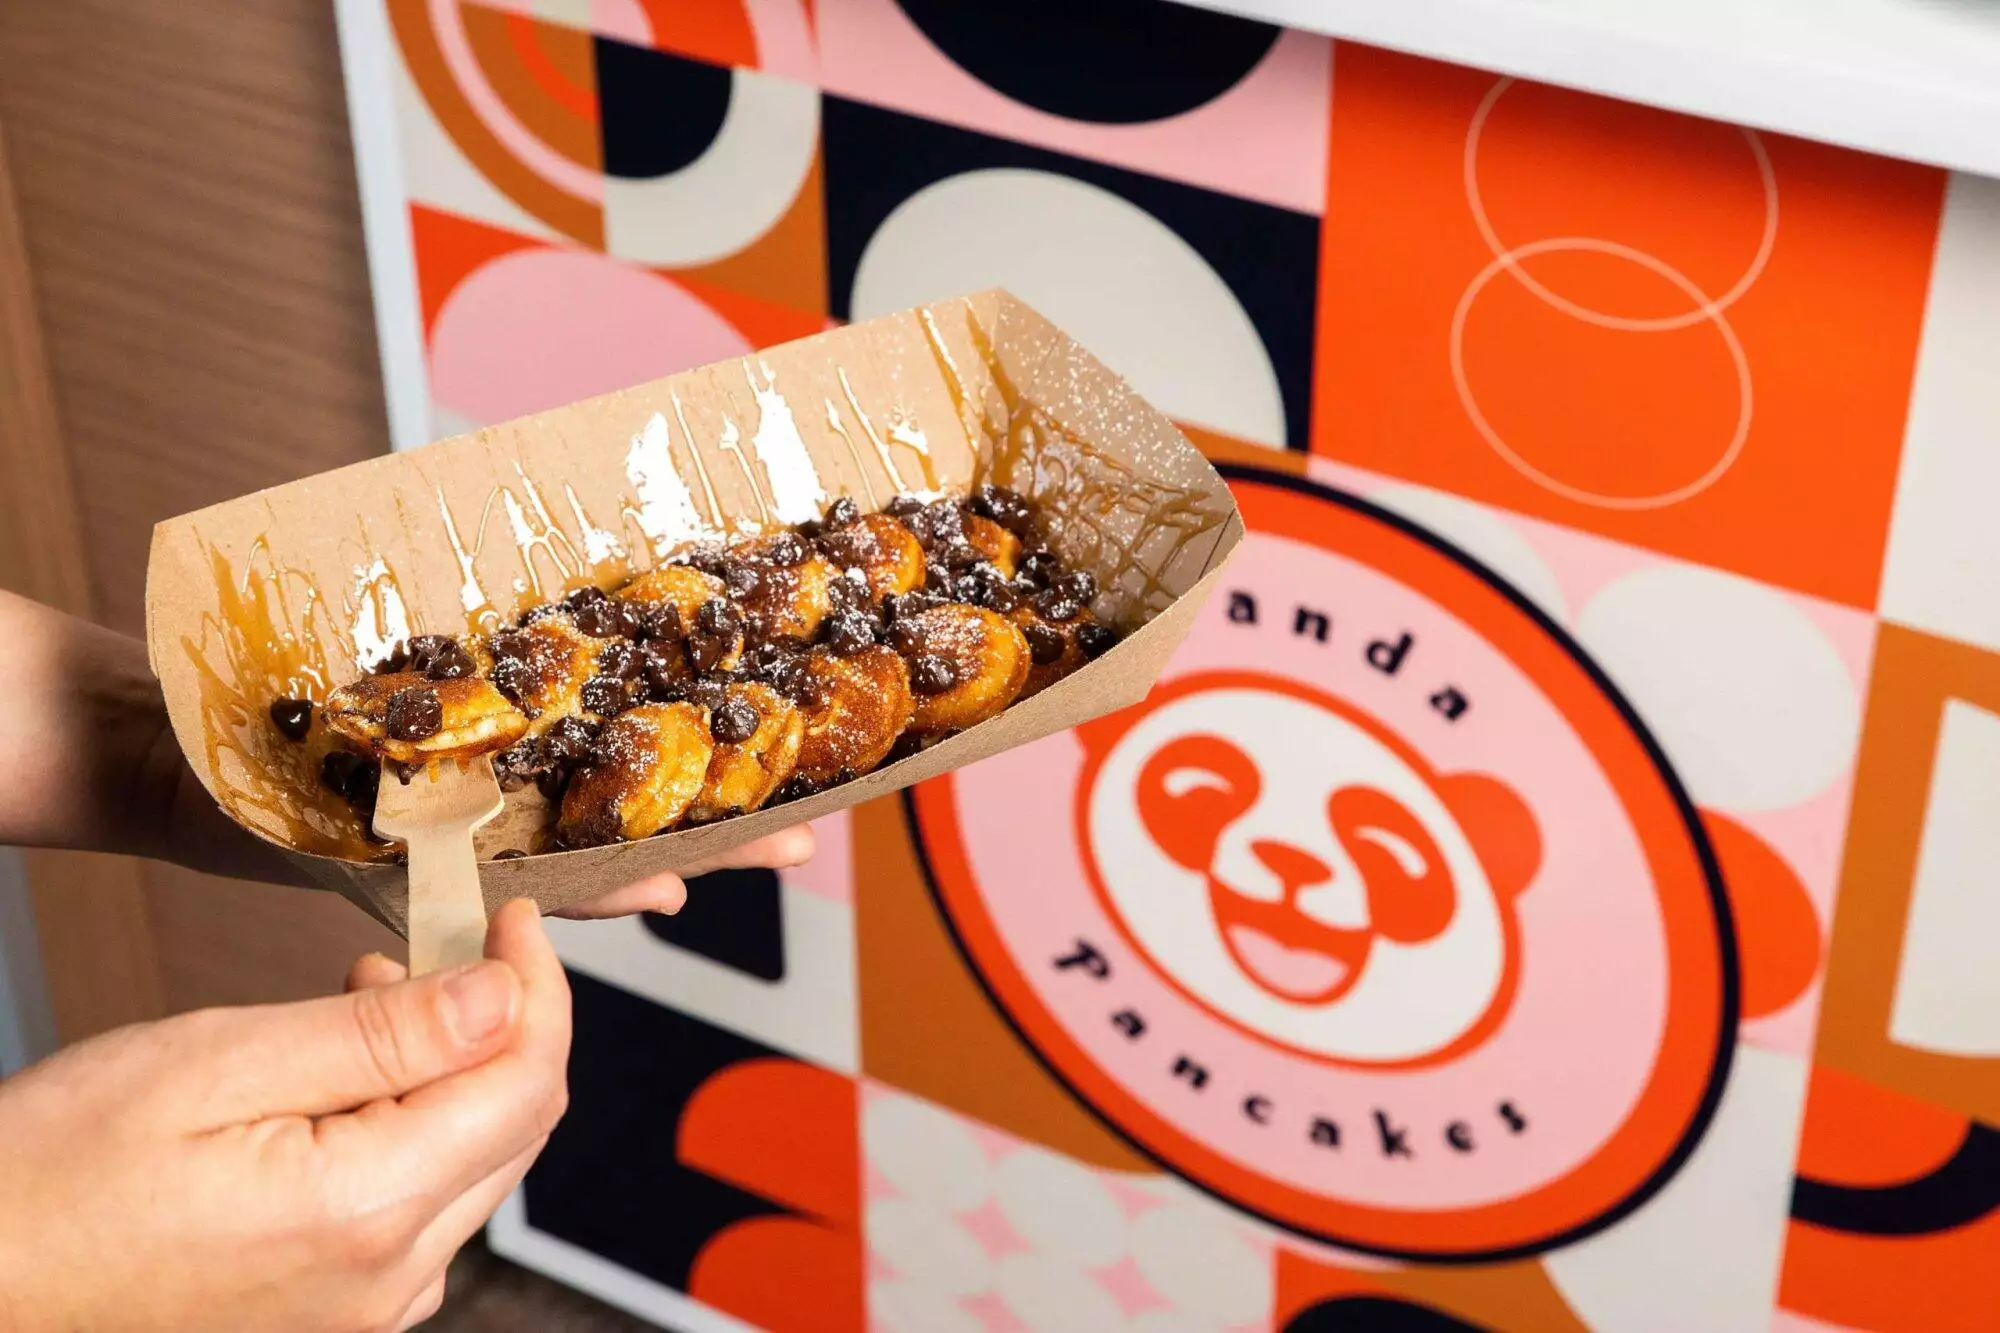 Panda Pancakes Launches Its Franchise Of Addictively Sweet Mini Treats With Several Locations Across Florida And Dozens More On The Way In 2022